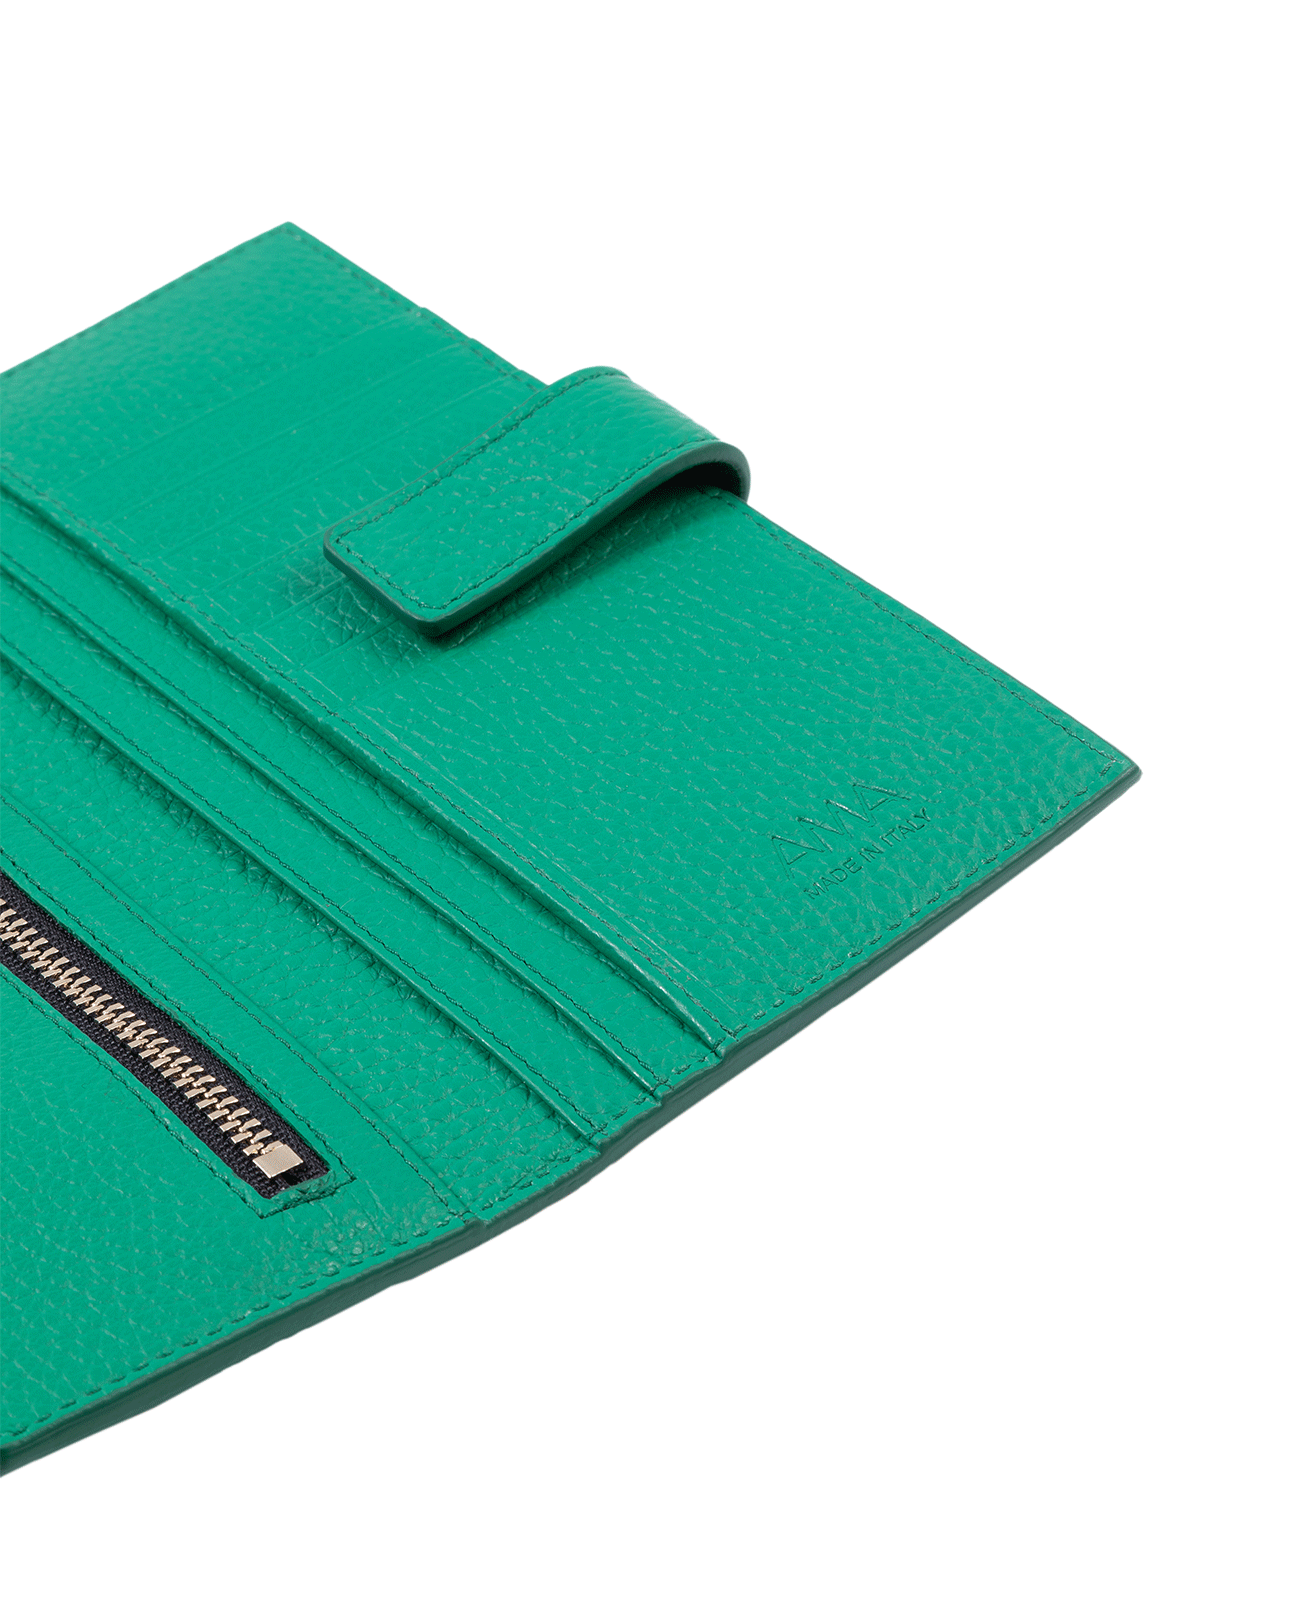 Wallet in Italian full-grain leather. Designed to carry your personal items. Available in a variety of styles and designs. Color: Elf. Size: Medium